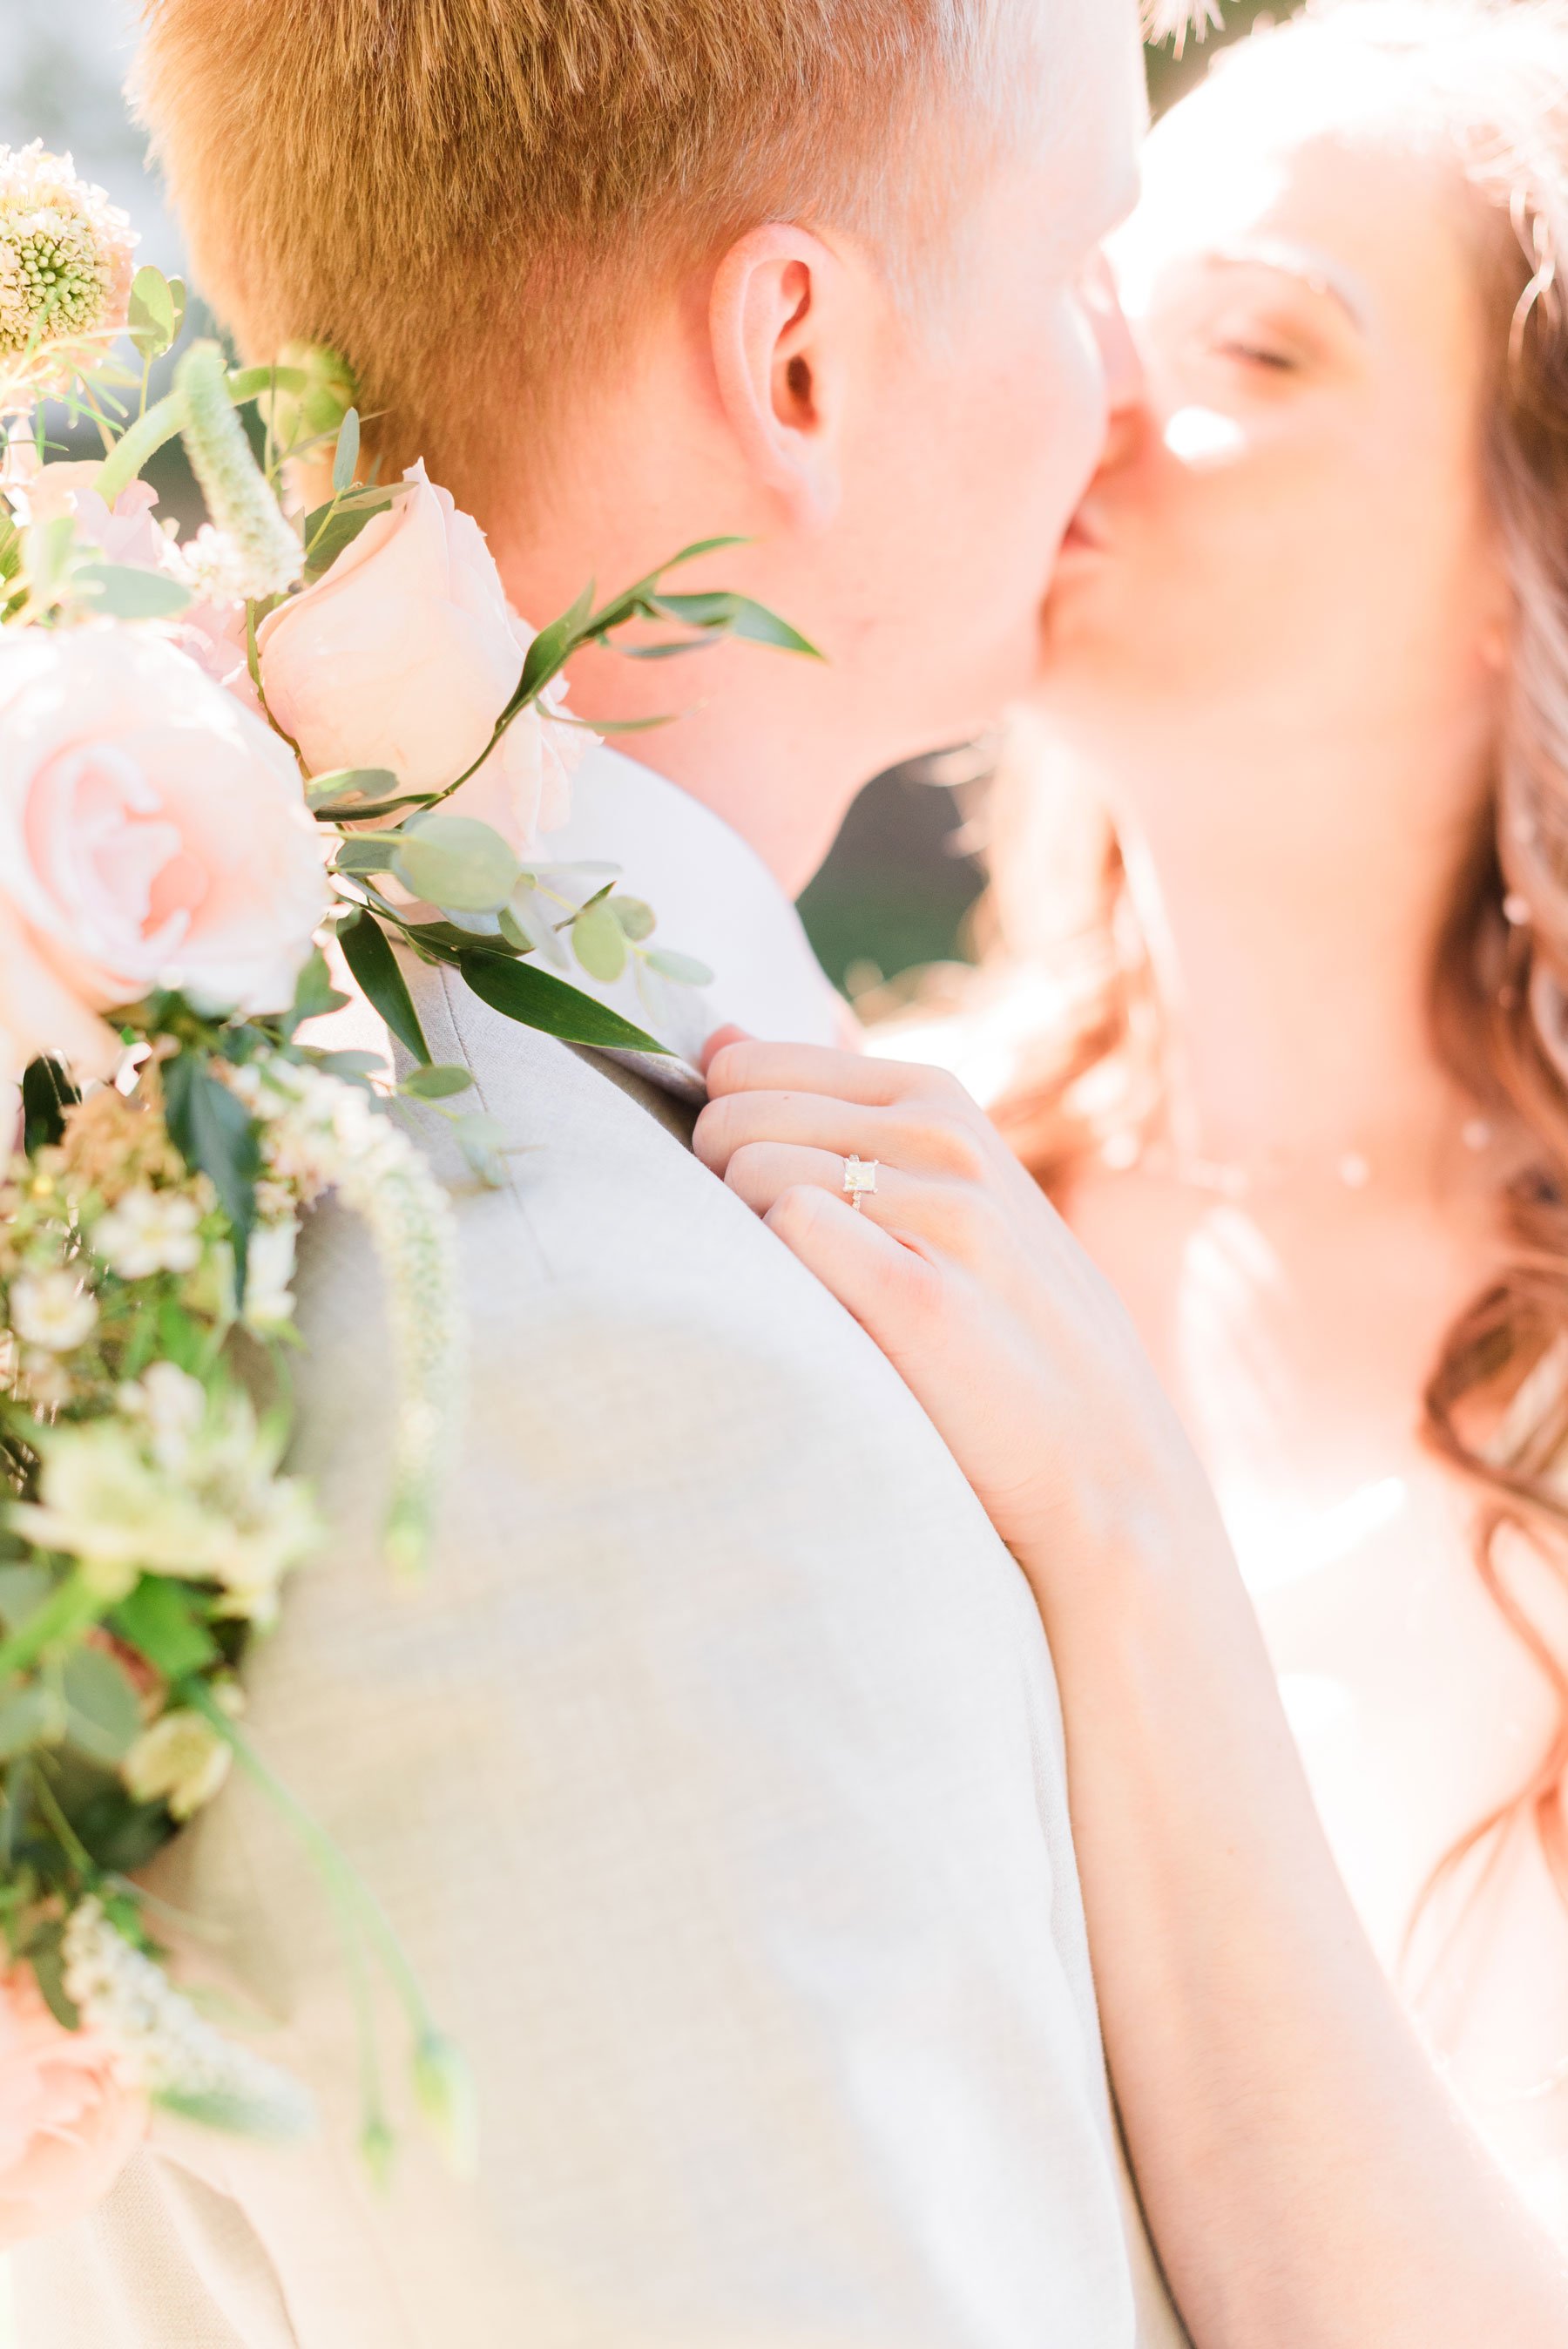    The newlyweds share a kiss in this bright and airy wedding portrait featuring her rose bouquet. #washingtondctemple #washingtondcweddingphotographer #dcwedding #pinkwedding #ldsweddingphotographer #pinkweddingbouquet #washingtondctempleexit #eastc